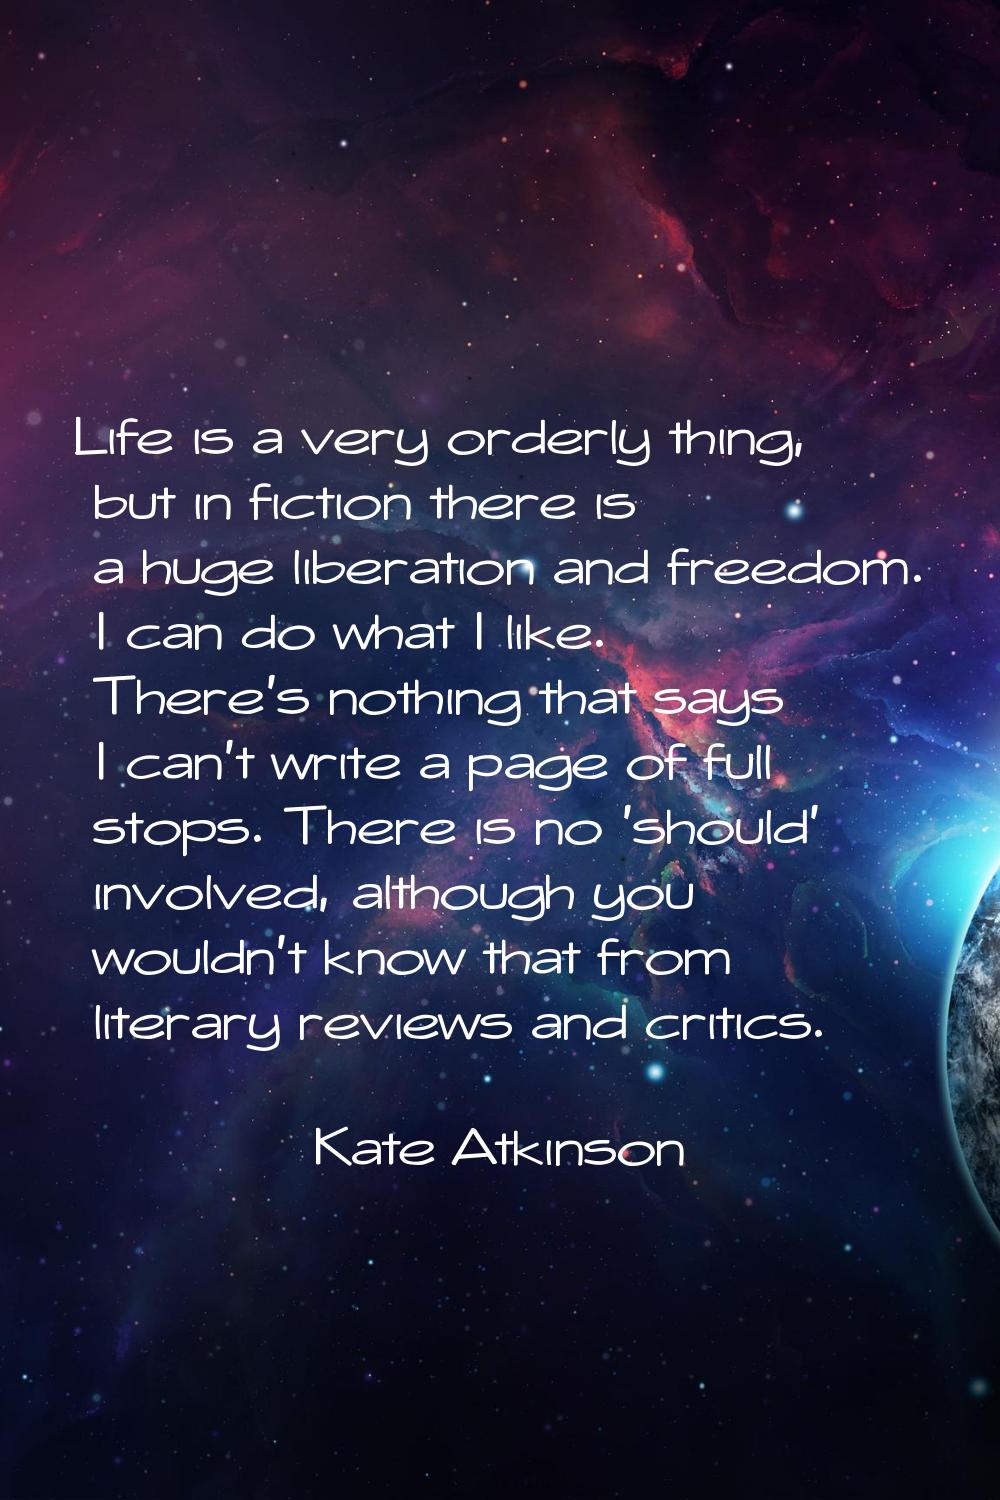 Life is a very orderly thing, but in fiction there is a huge liberation and freedom. I can do what 